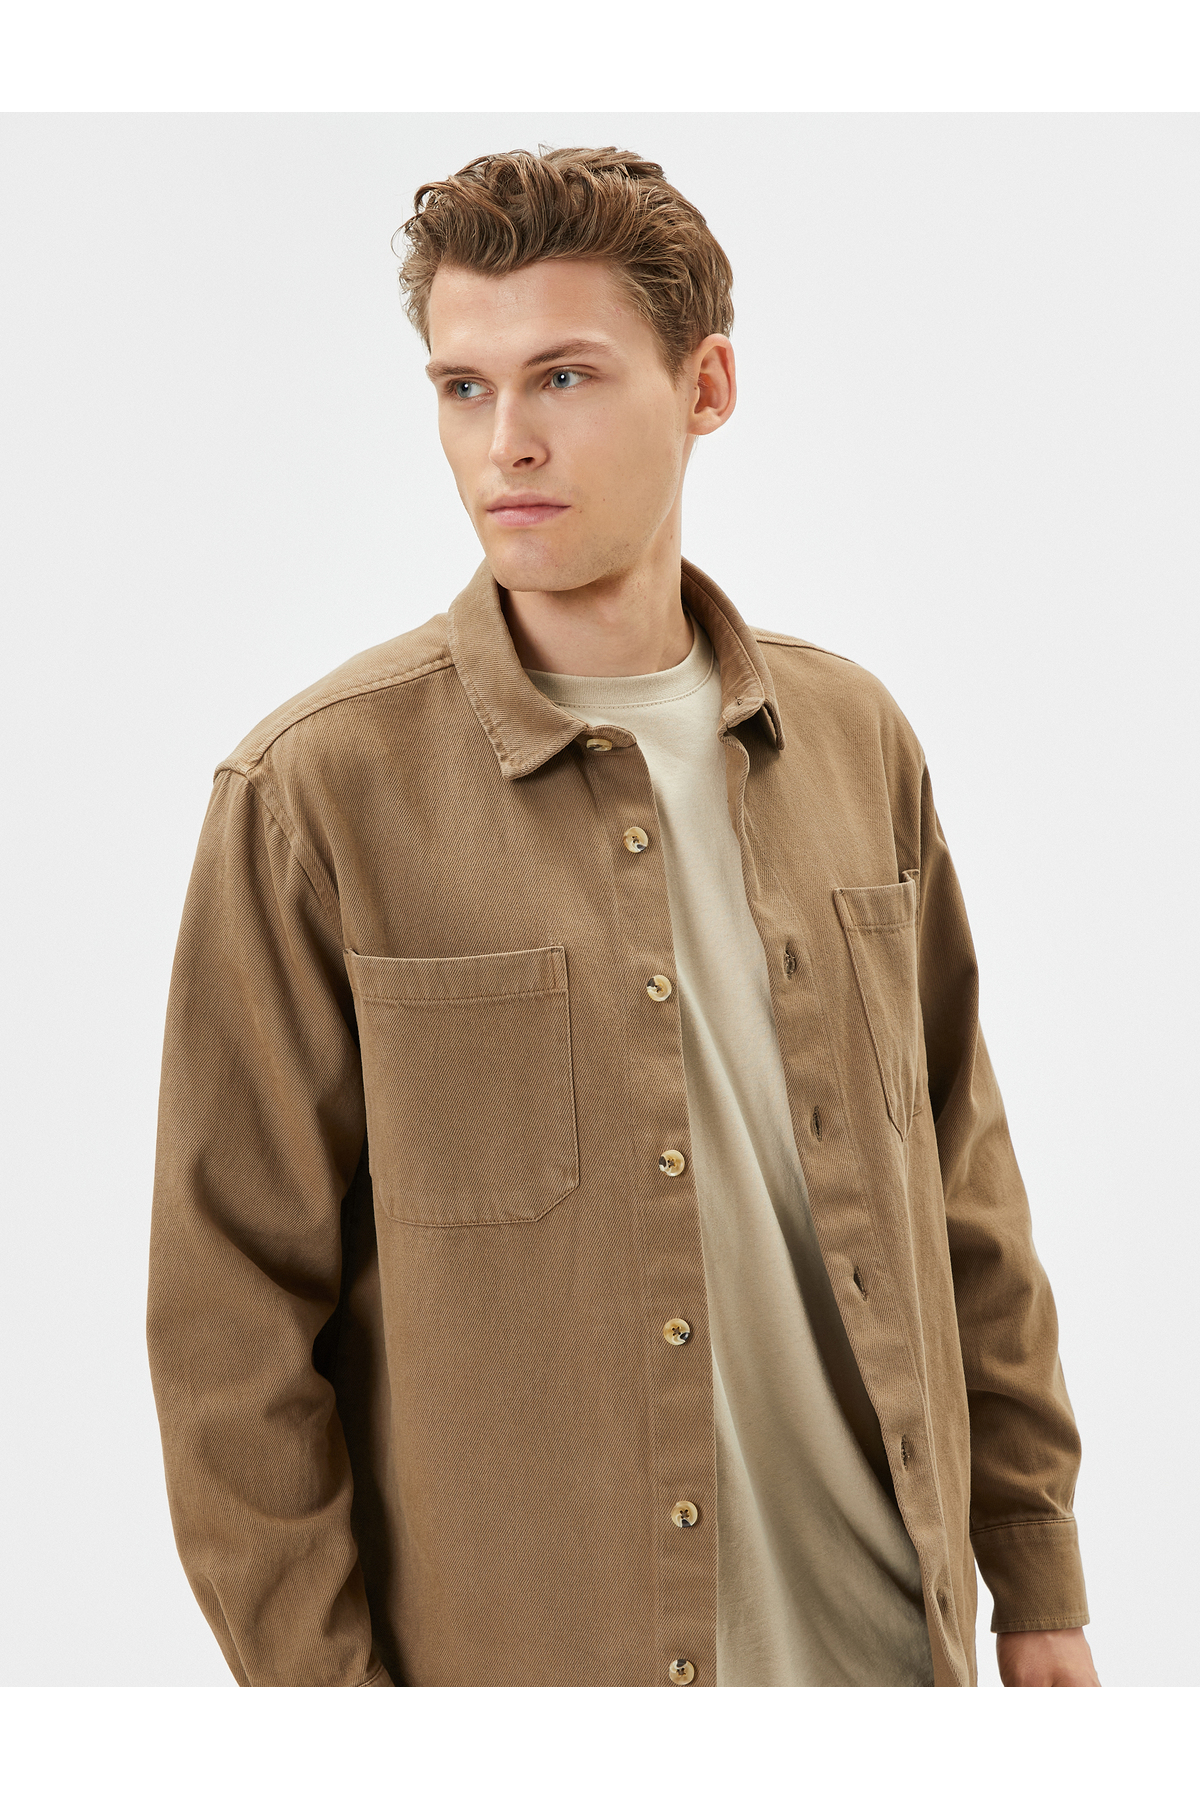 Koton Canvas Shirt Pocket Detailed Classic Collar Buttoned Long Sleeve